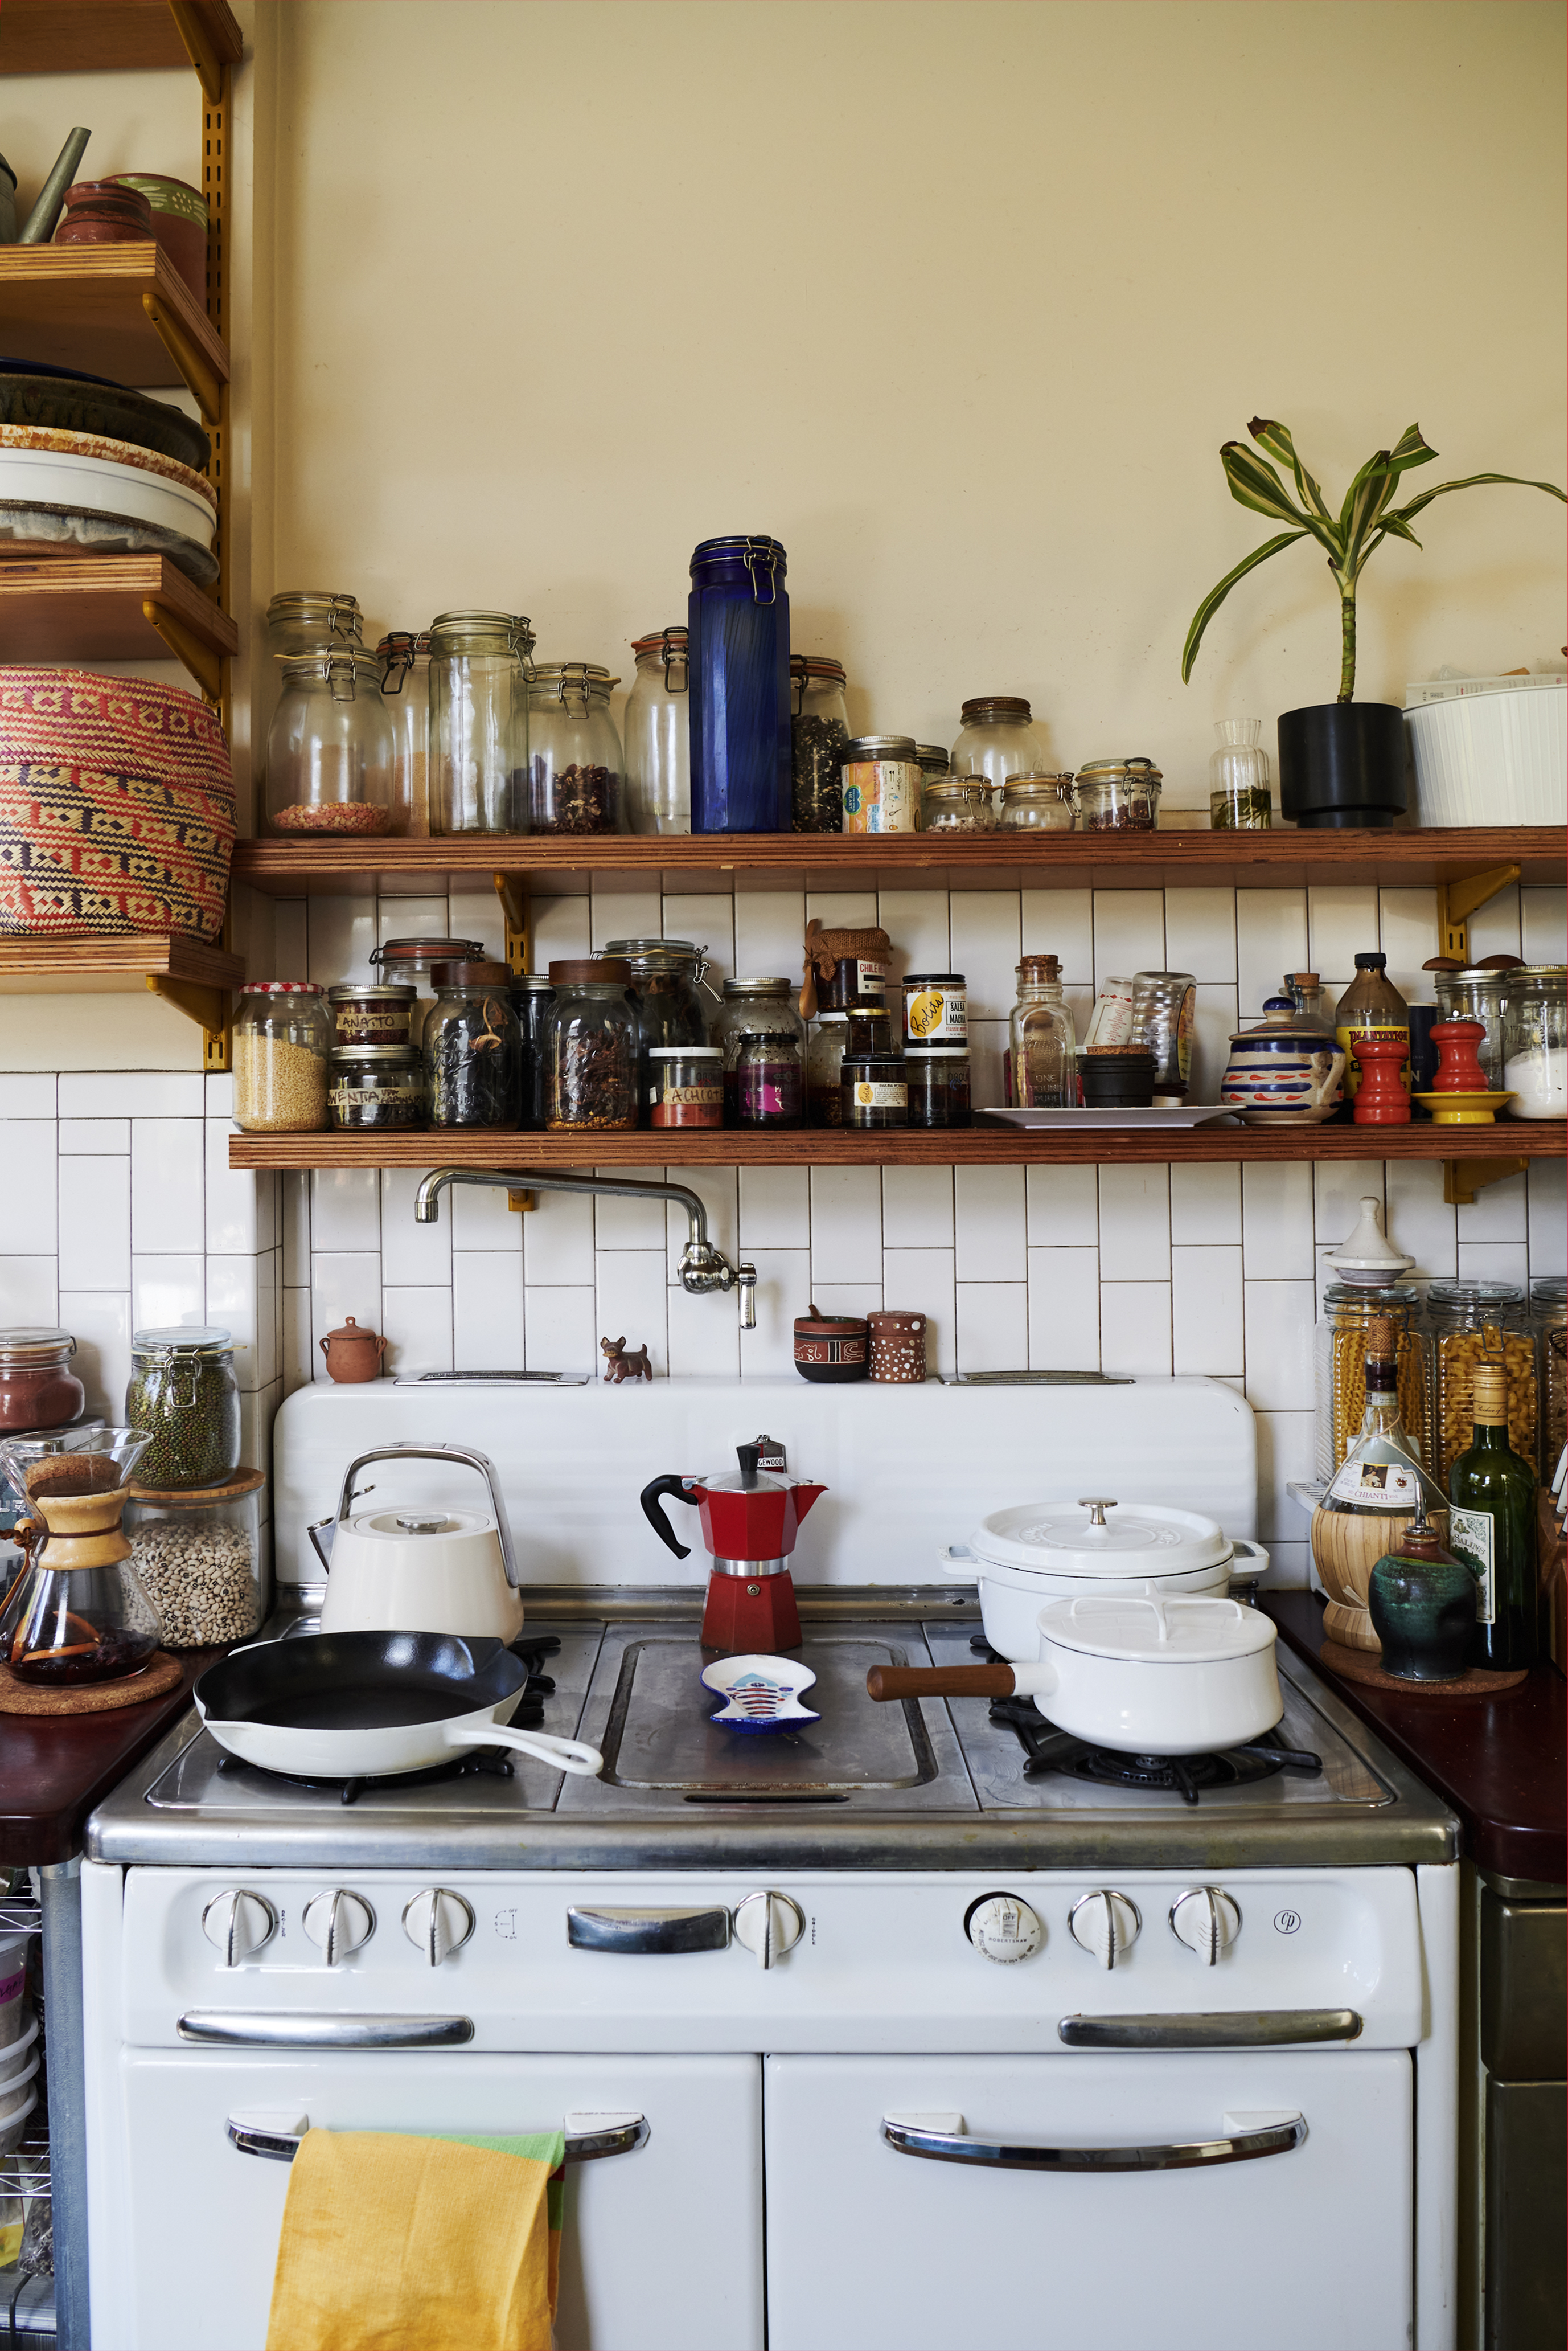 This image shows a cluttered kitchen with jars of spices on shelves, a white stove with various cooking pots and a red coffee maker, and a few plants.